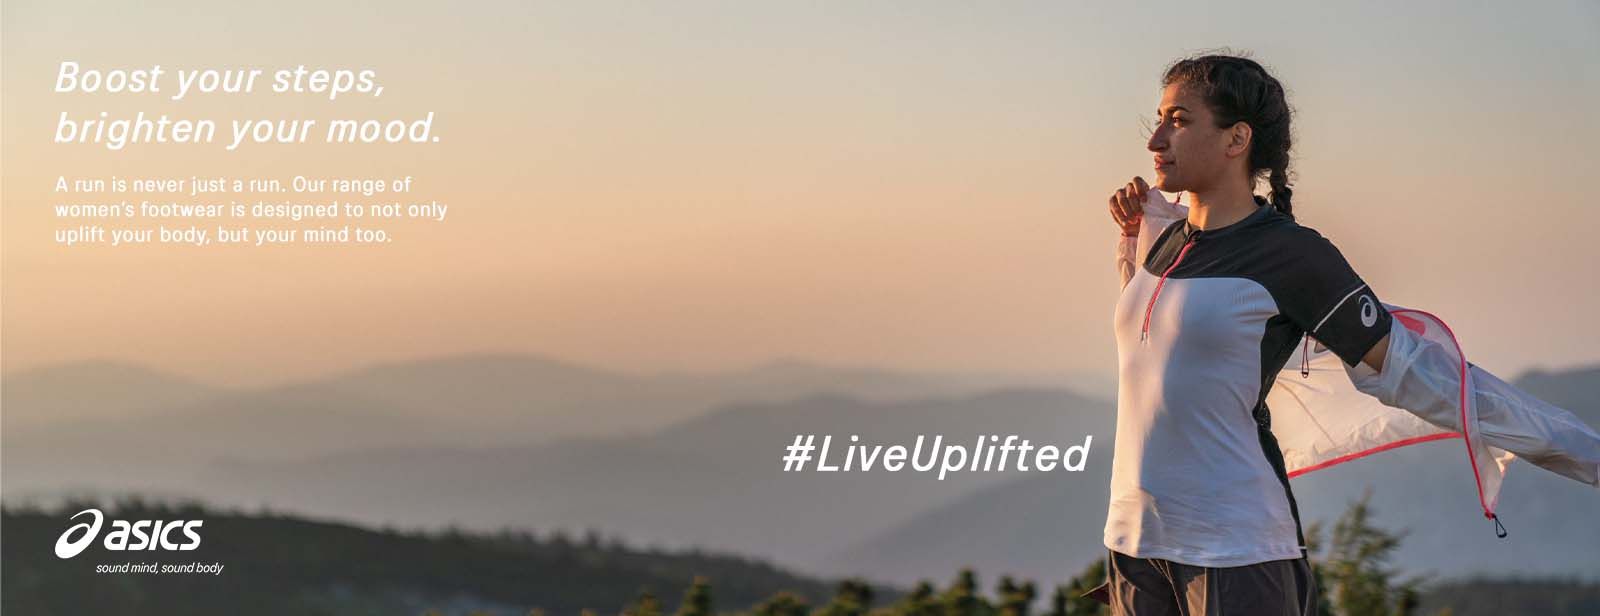 Live Uplifted